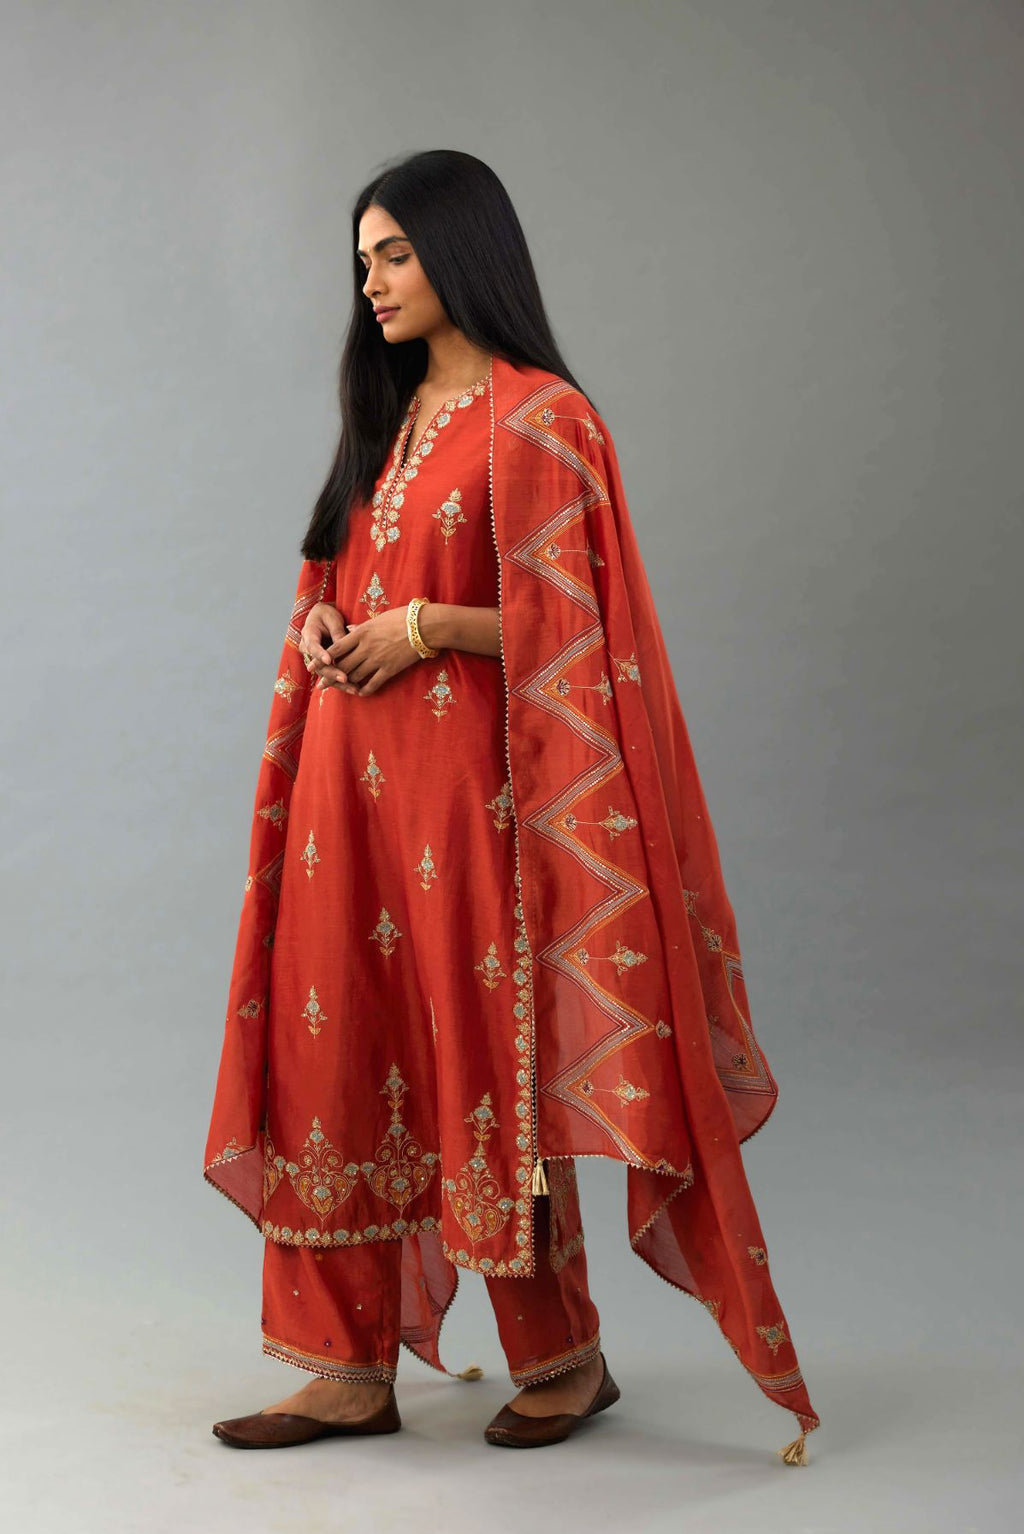 Rust Silk chanderi dupatta in chevron pattern embroidery with contrast silk thread and dori at the sides.